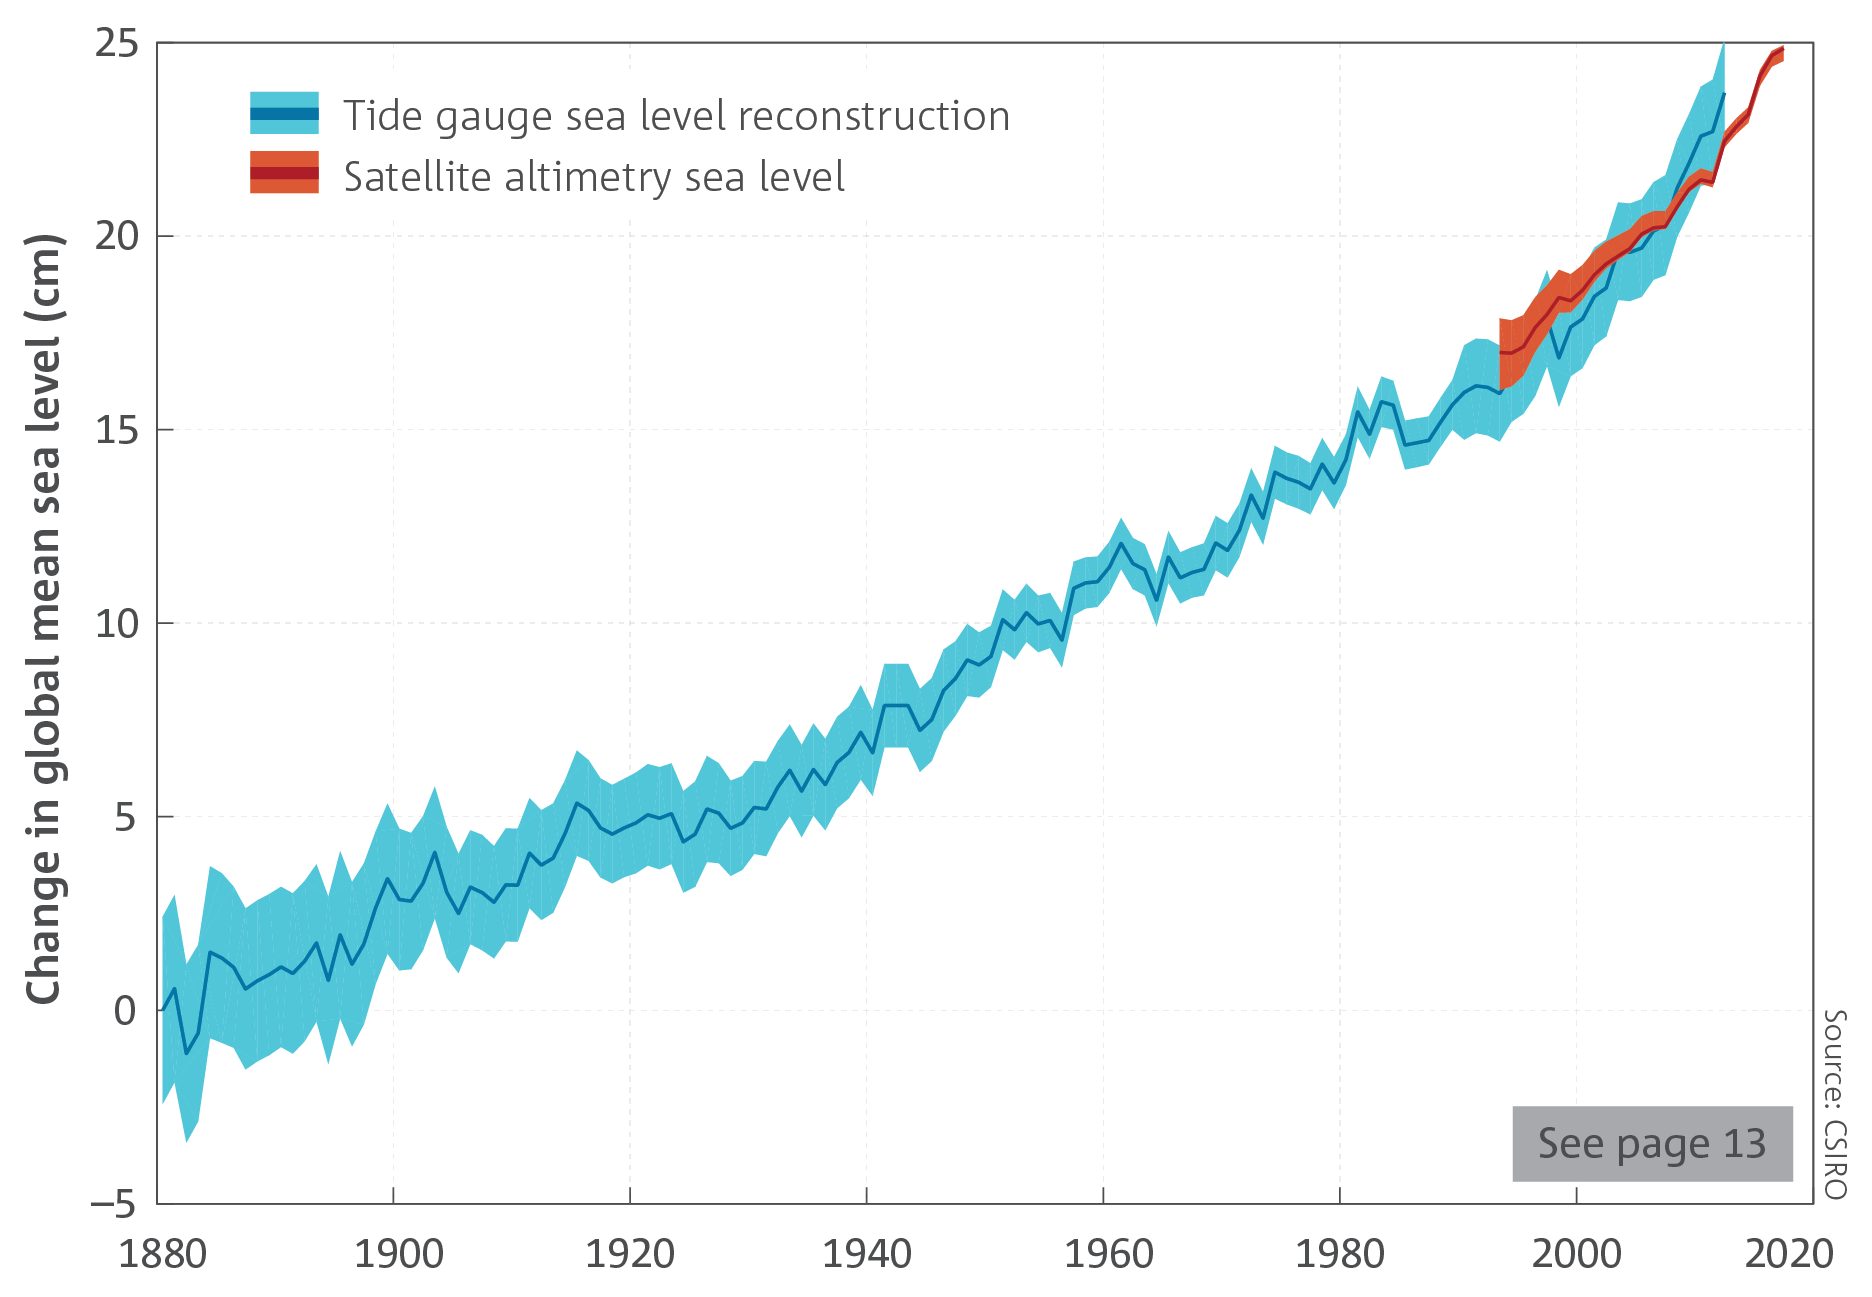 A line graph showing tide gauge sea level reconstruction and satellite altimetry sea level.